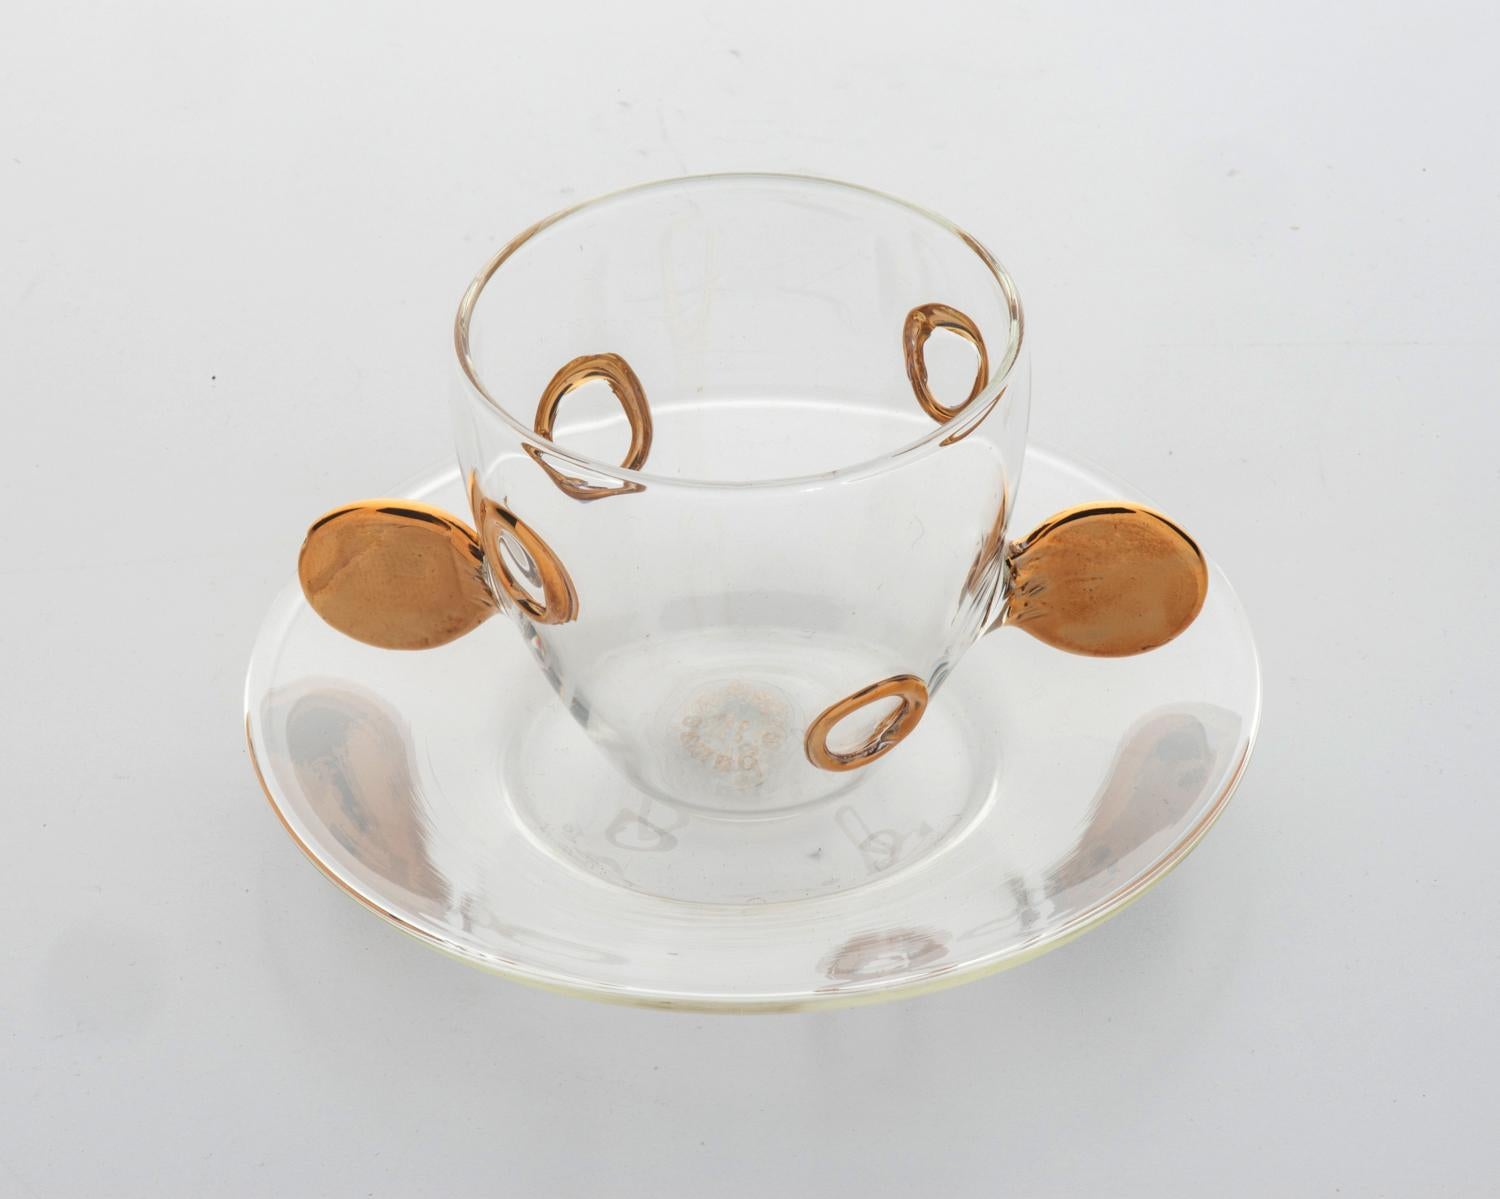 O/4257 - Italian set of eight pretty glass cups for coffee, with golden decorations - by Parise -
little dish: diameter 11 cm.